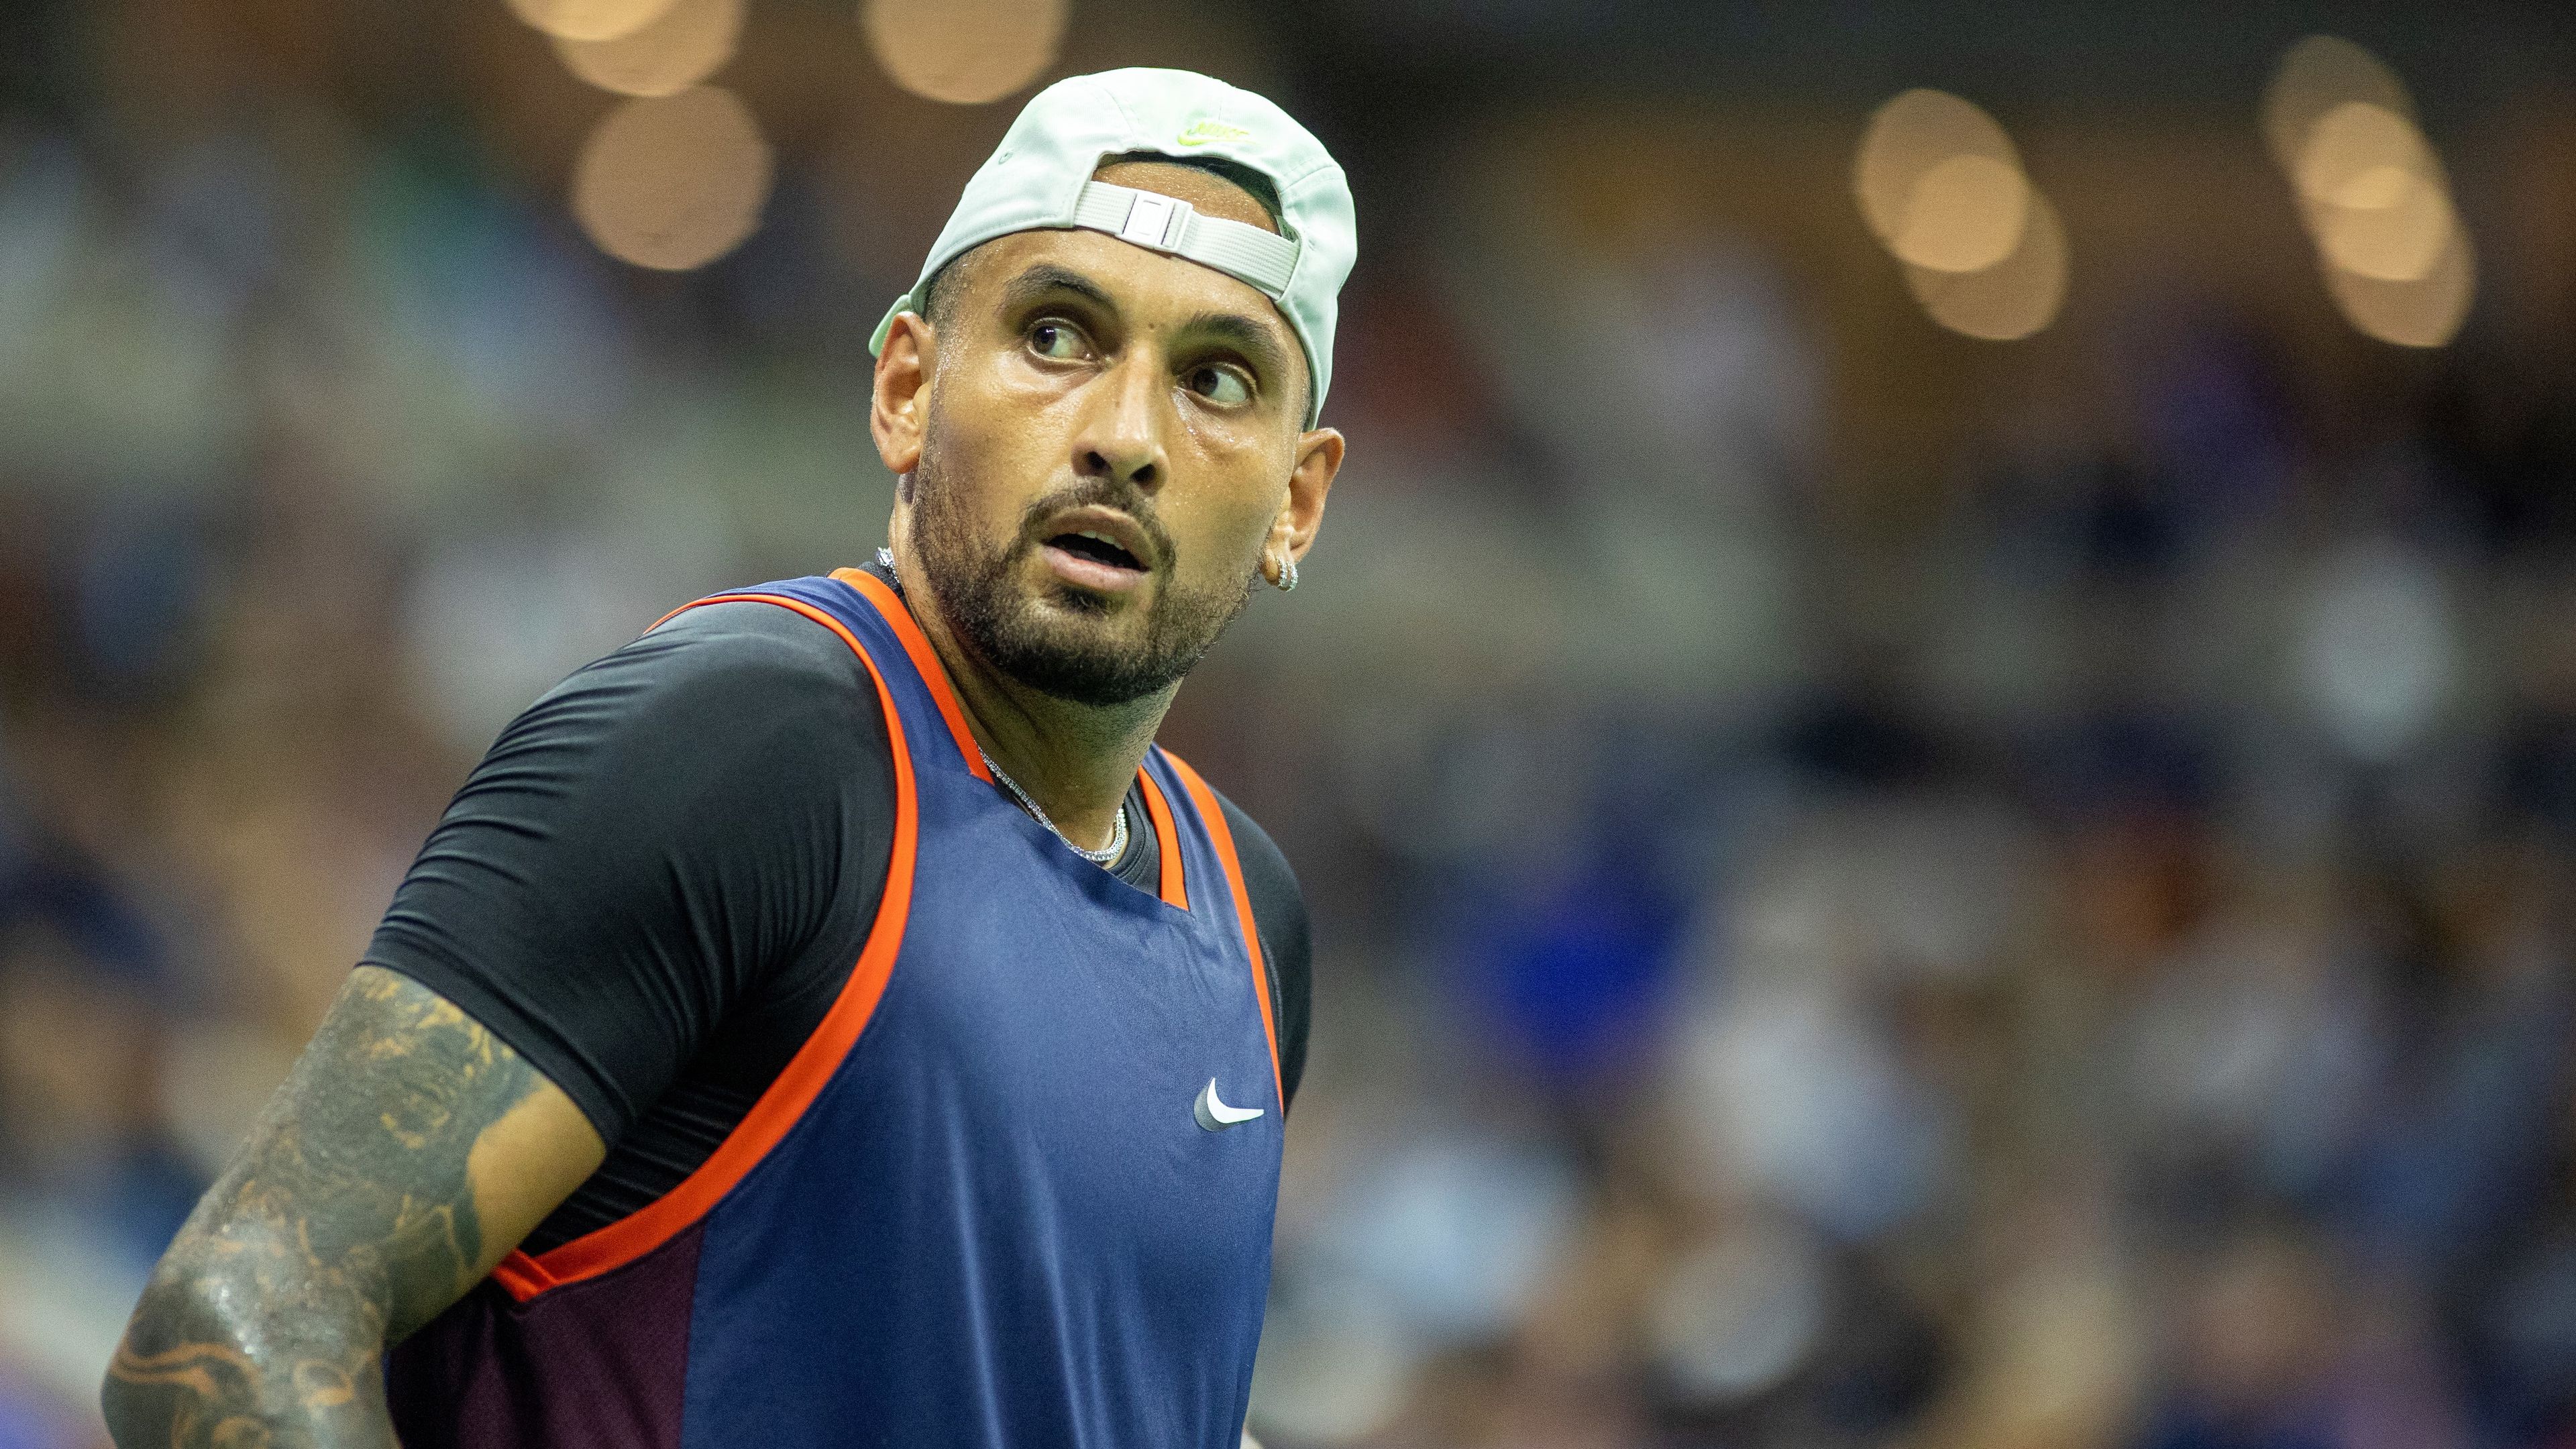 Tennis Australia chief executive Craig Tiley defends Nick Kyrgios withdrawal from United Cup